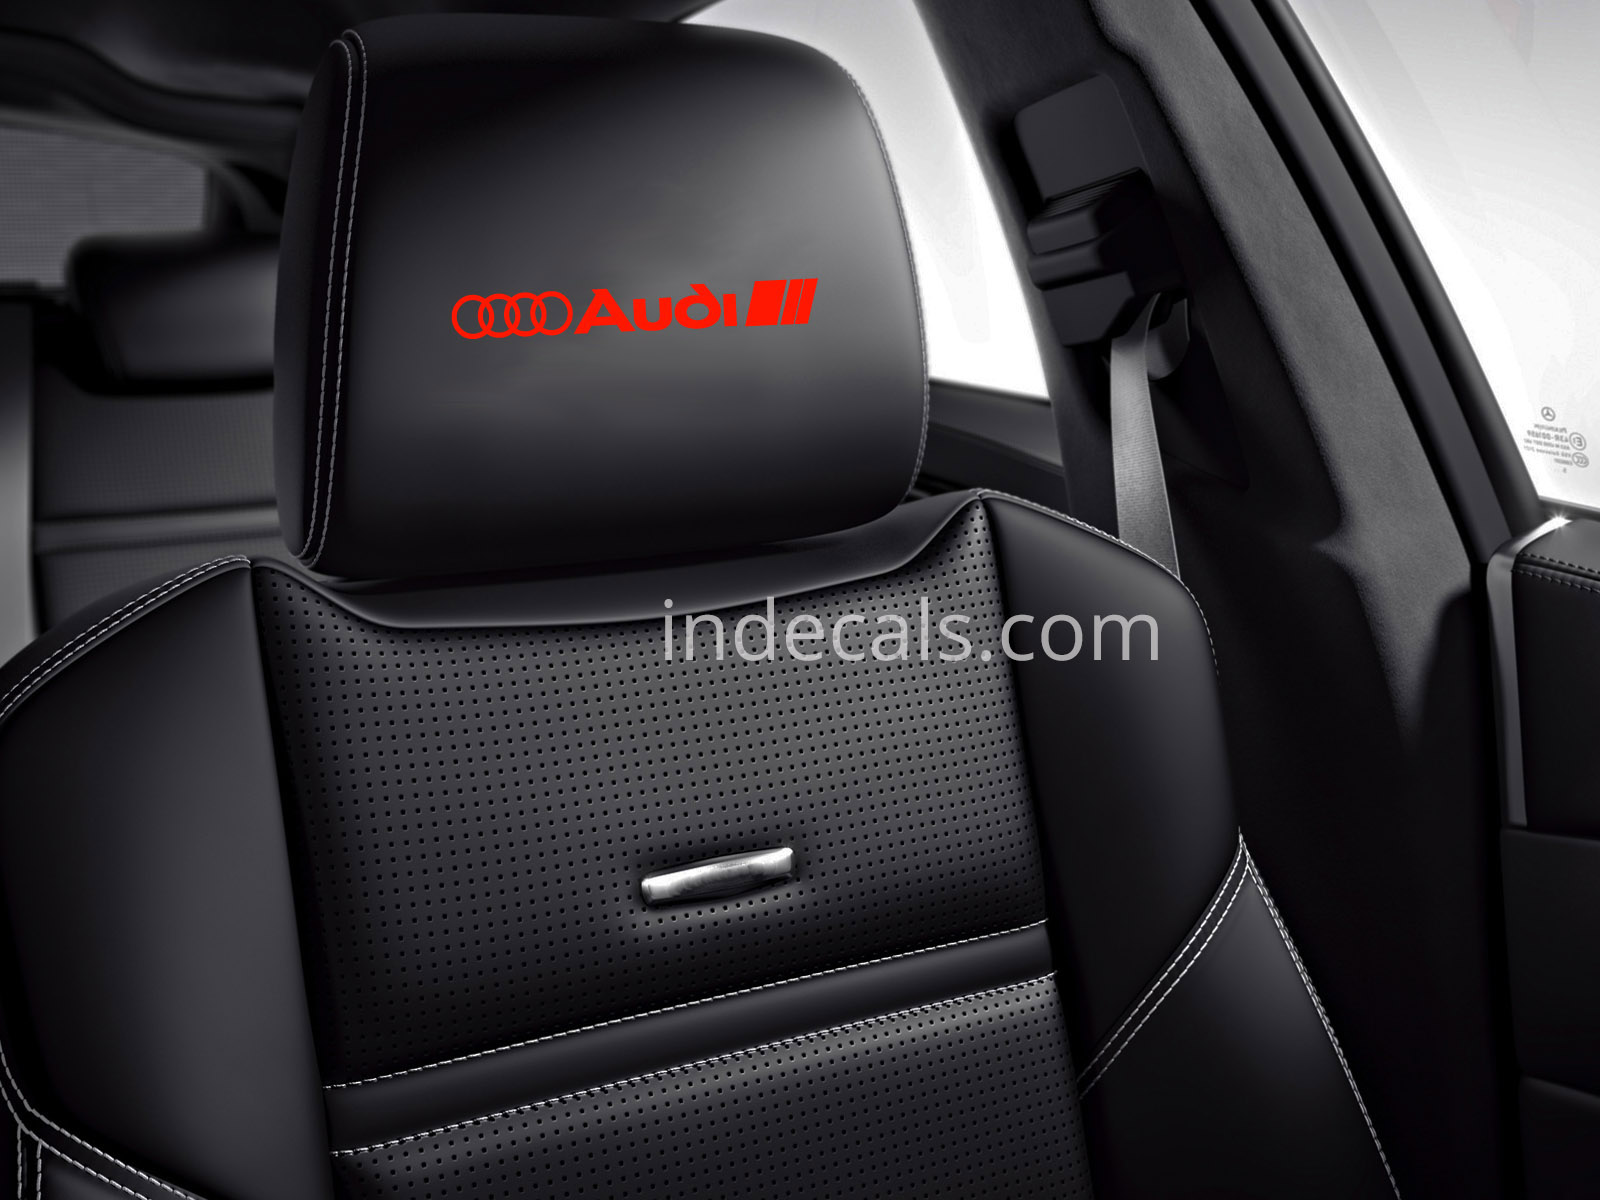 6 x Audi Stickers for Headrests - Red